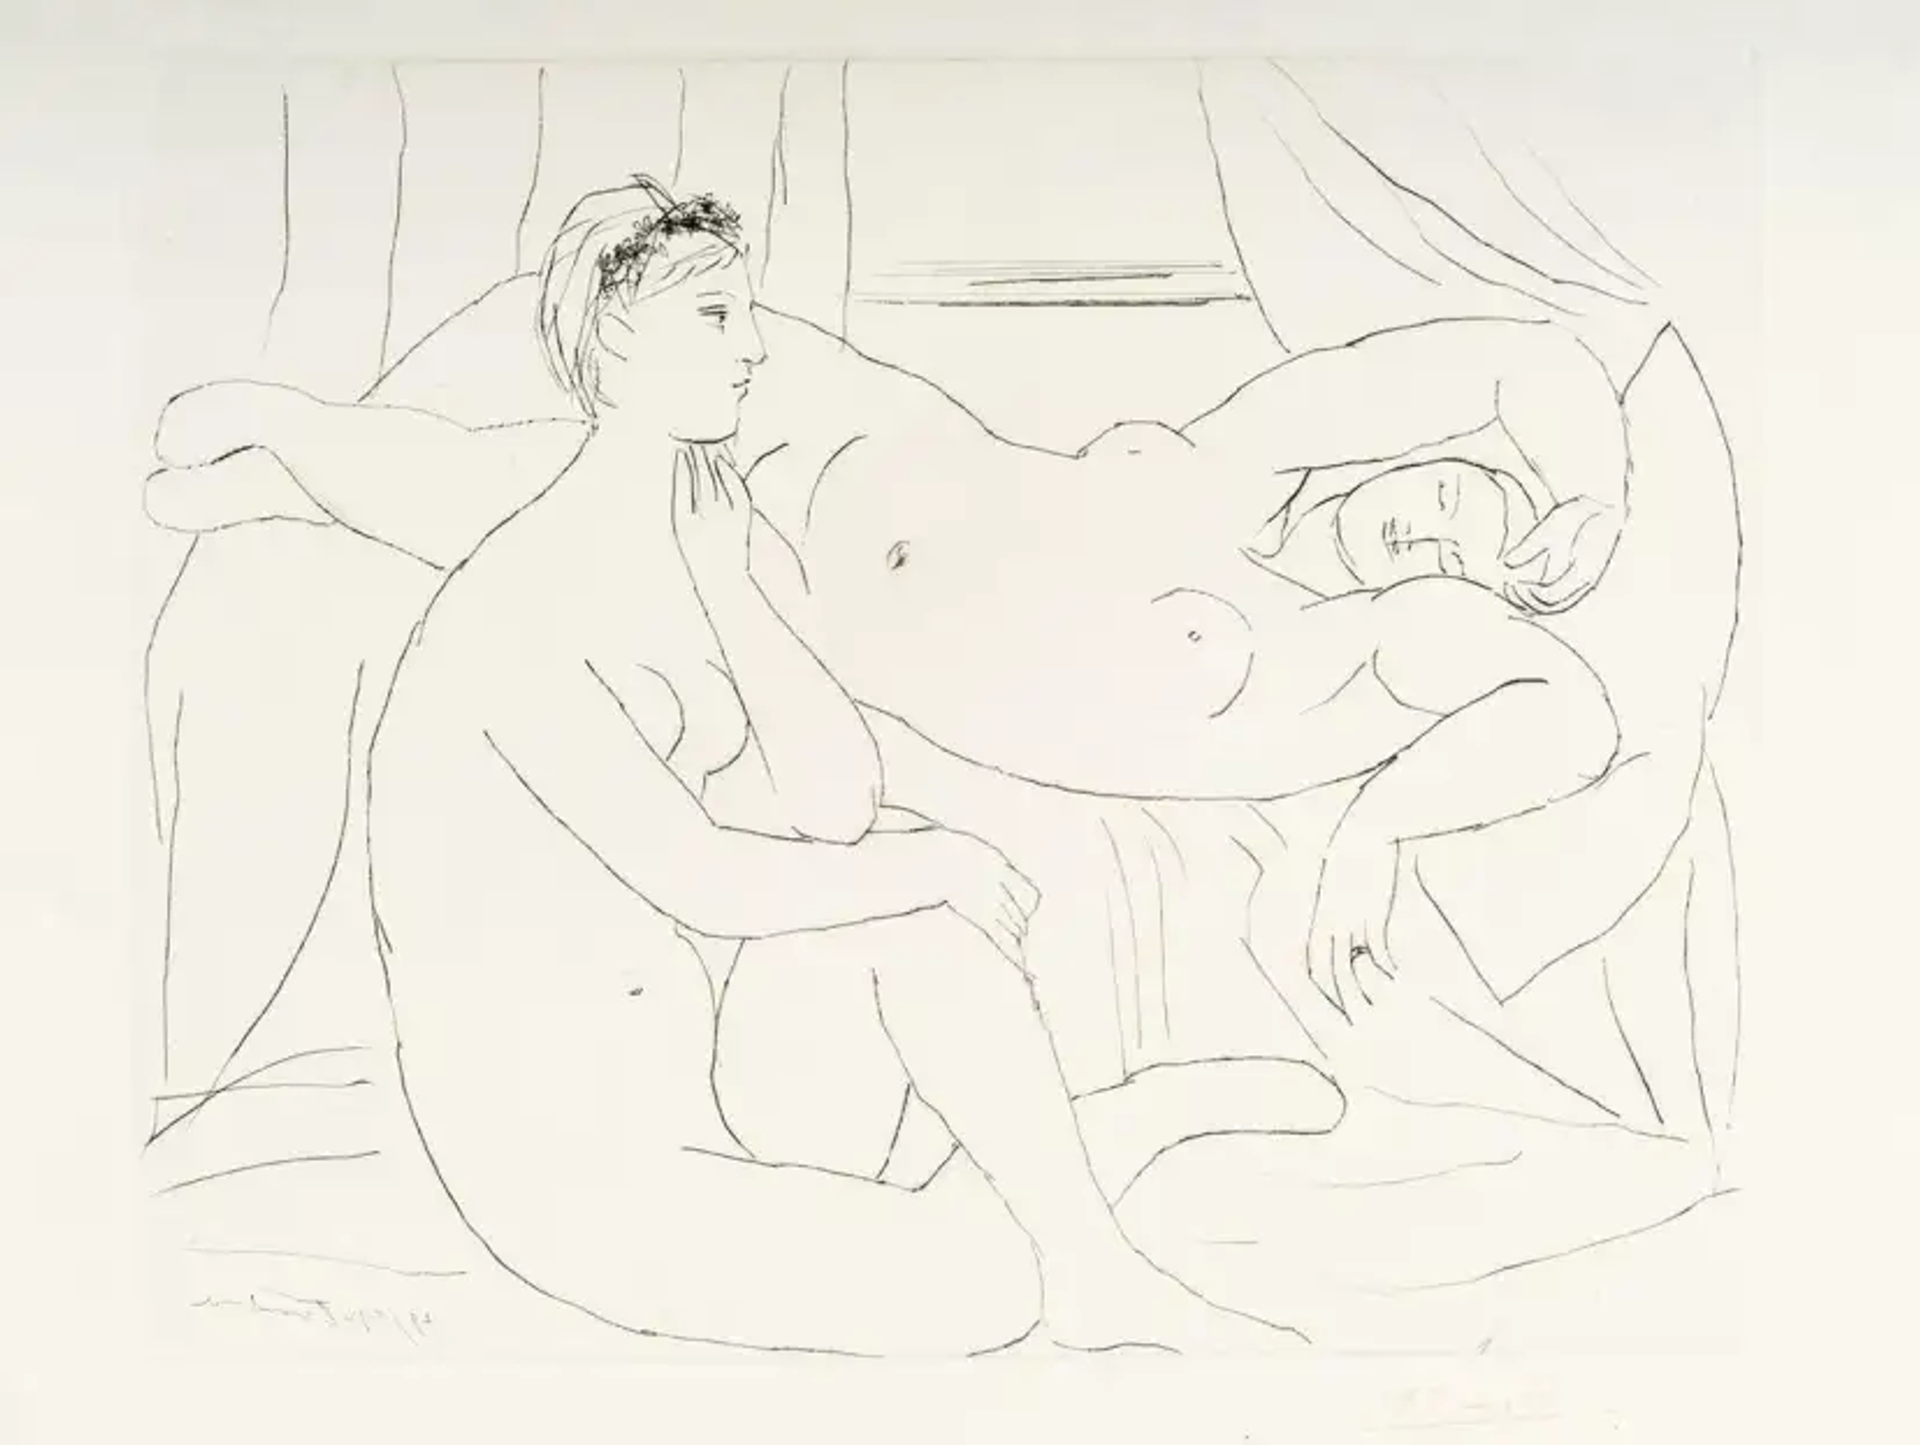 Picasso's Muses: The Human Price of Genius